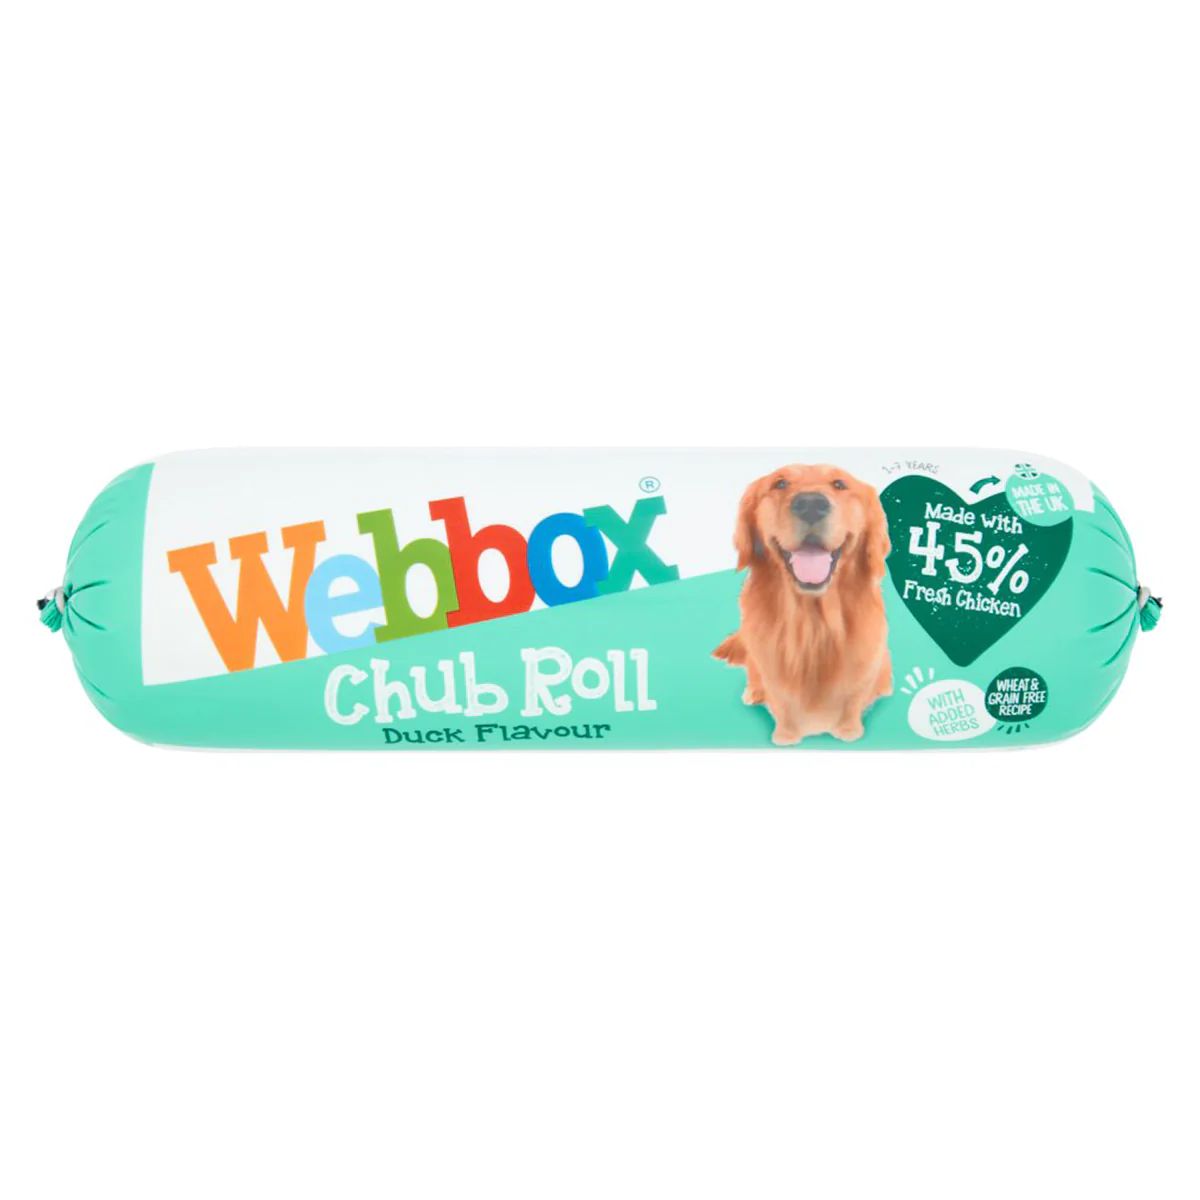 A packaged Webbox Chub Roll Duck Flavour - 720g for dogs.